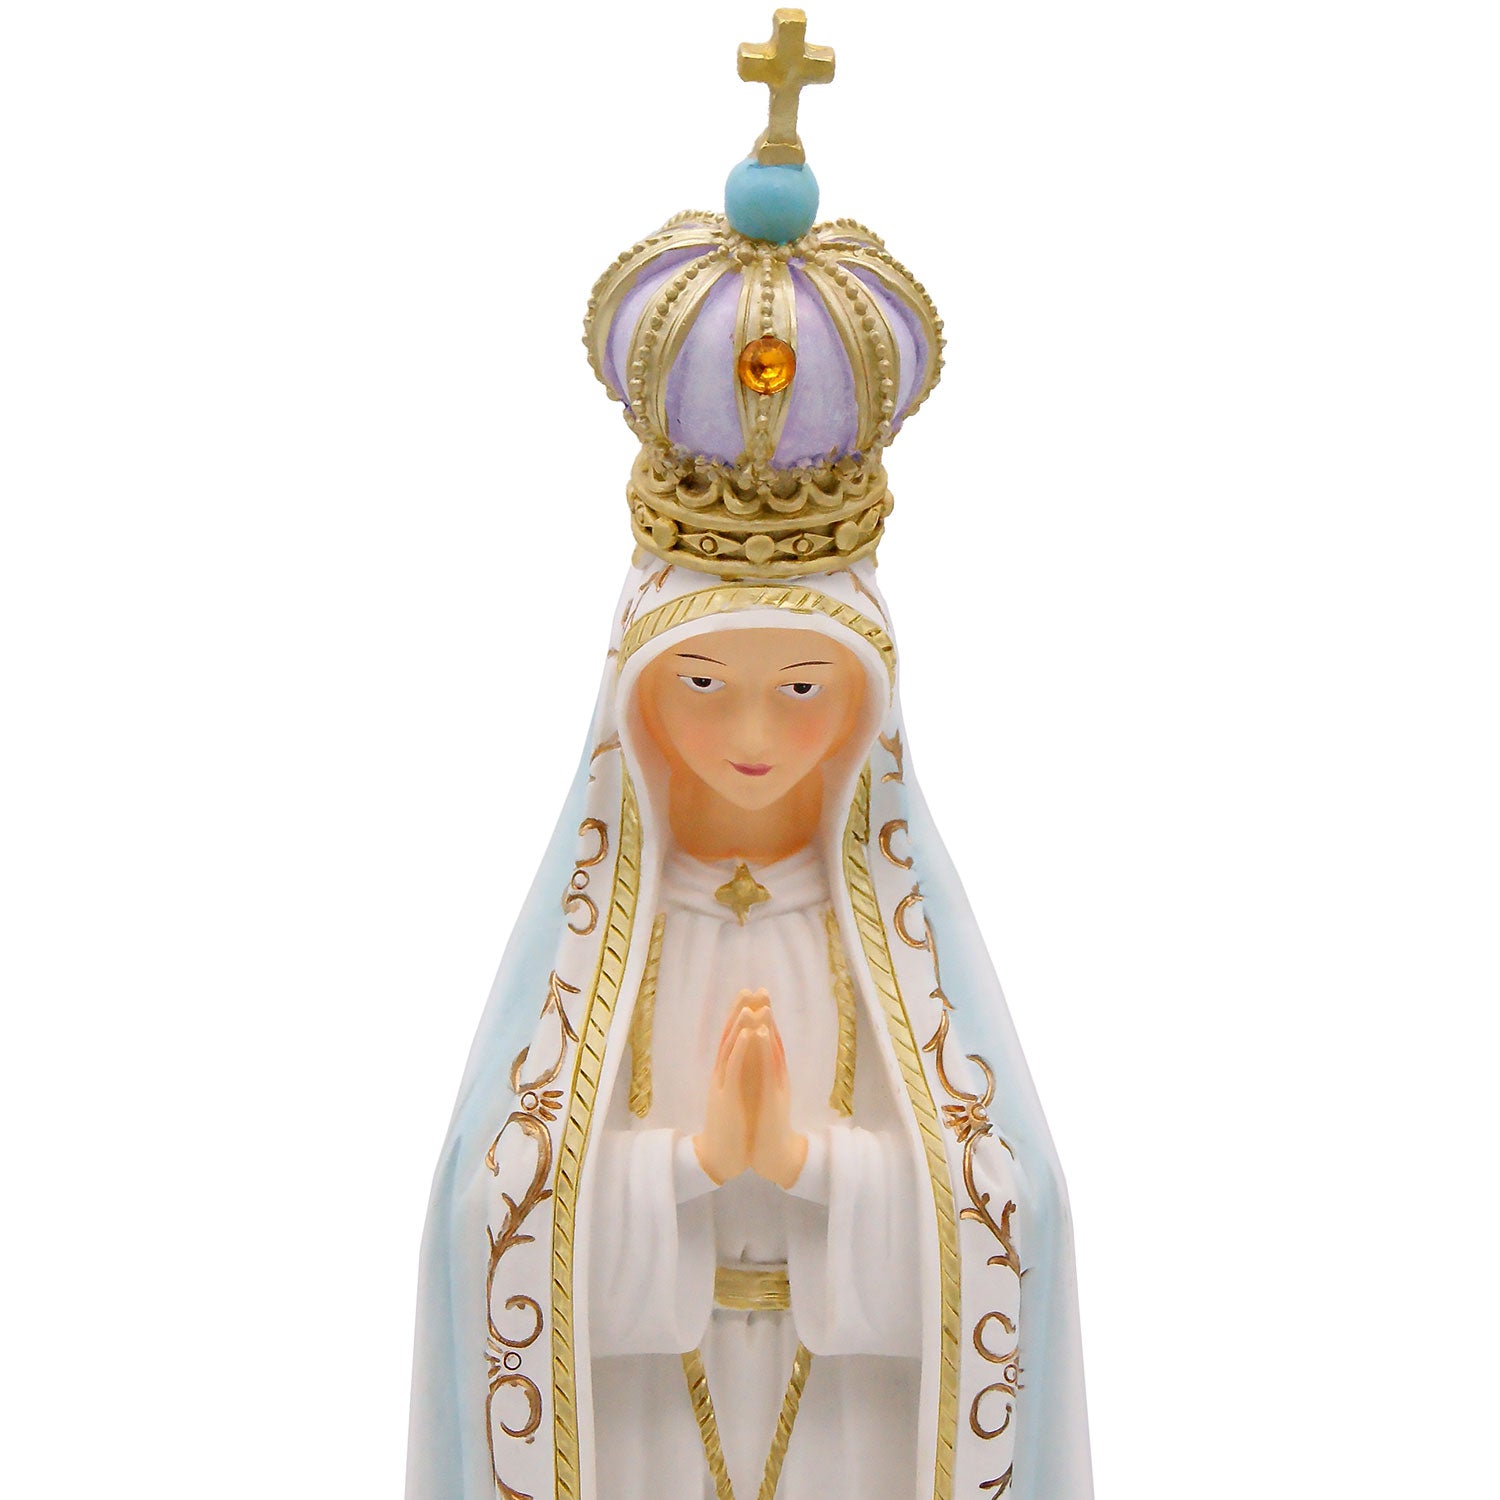 Our Lady statue is Hand painted and hand decorated .